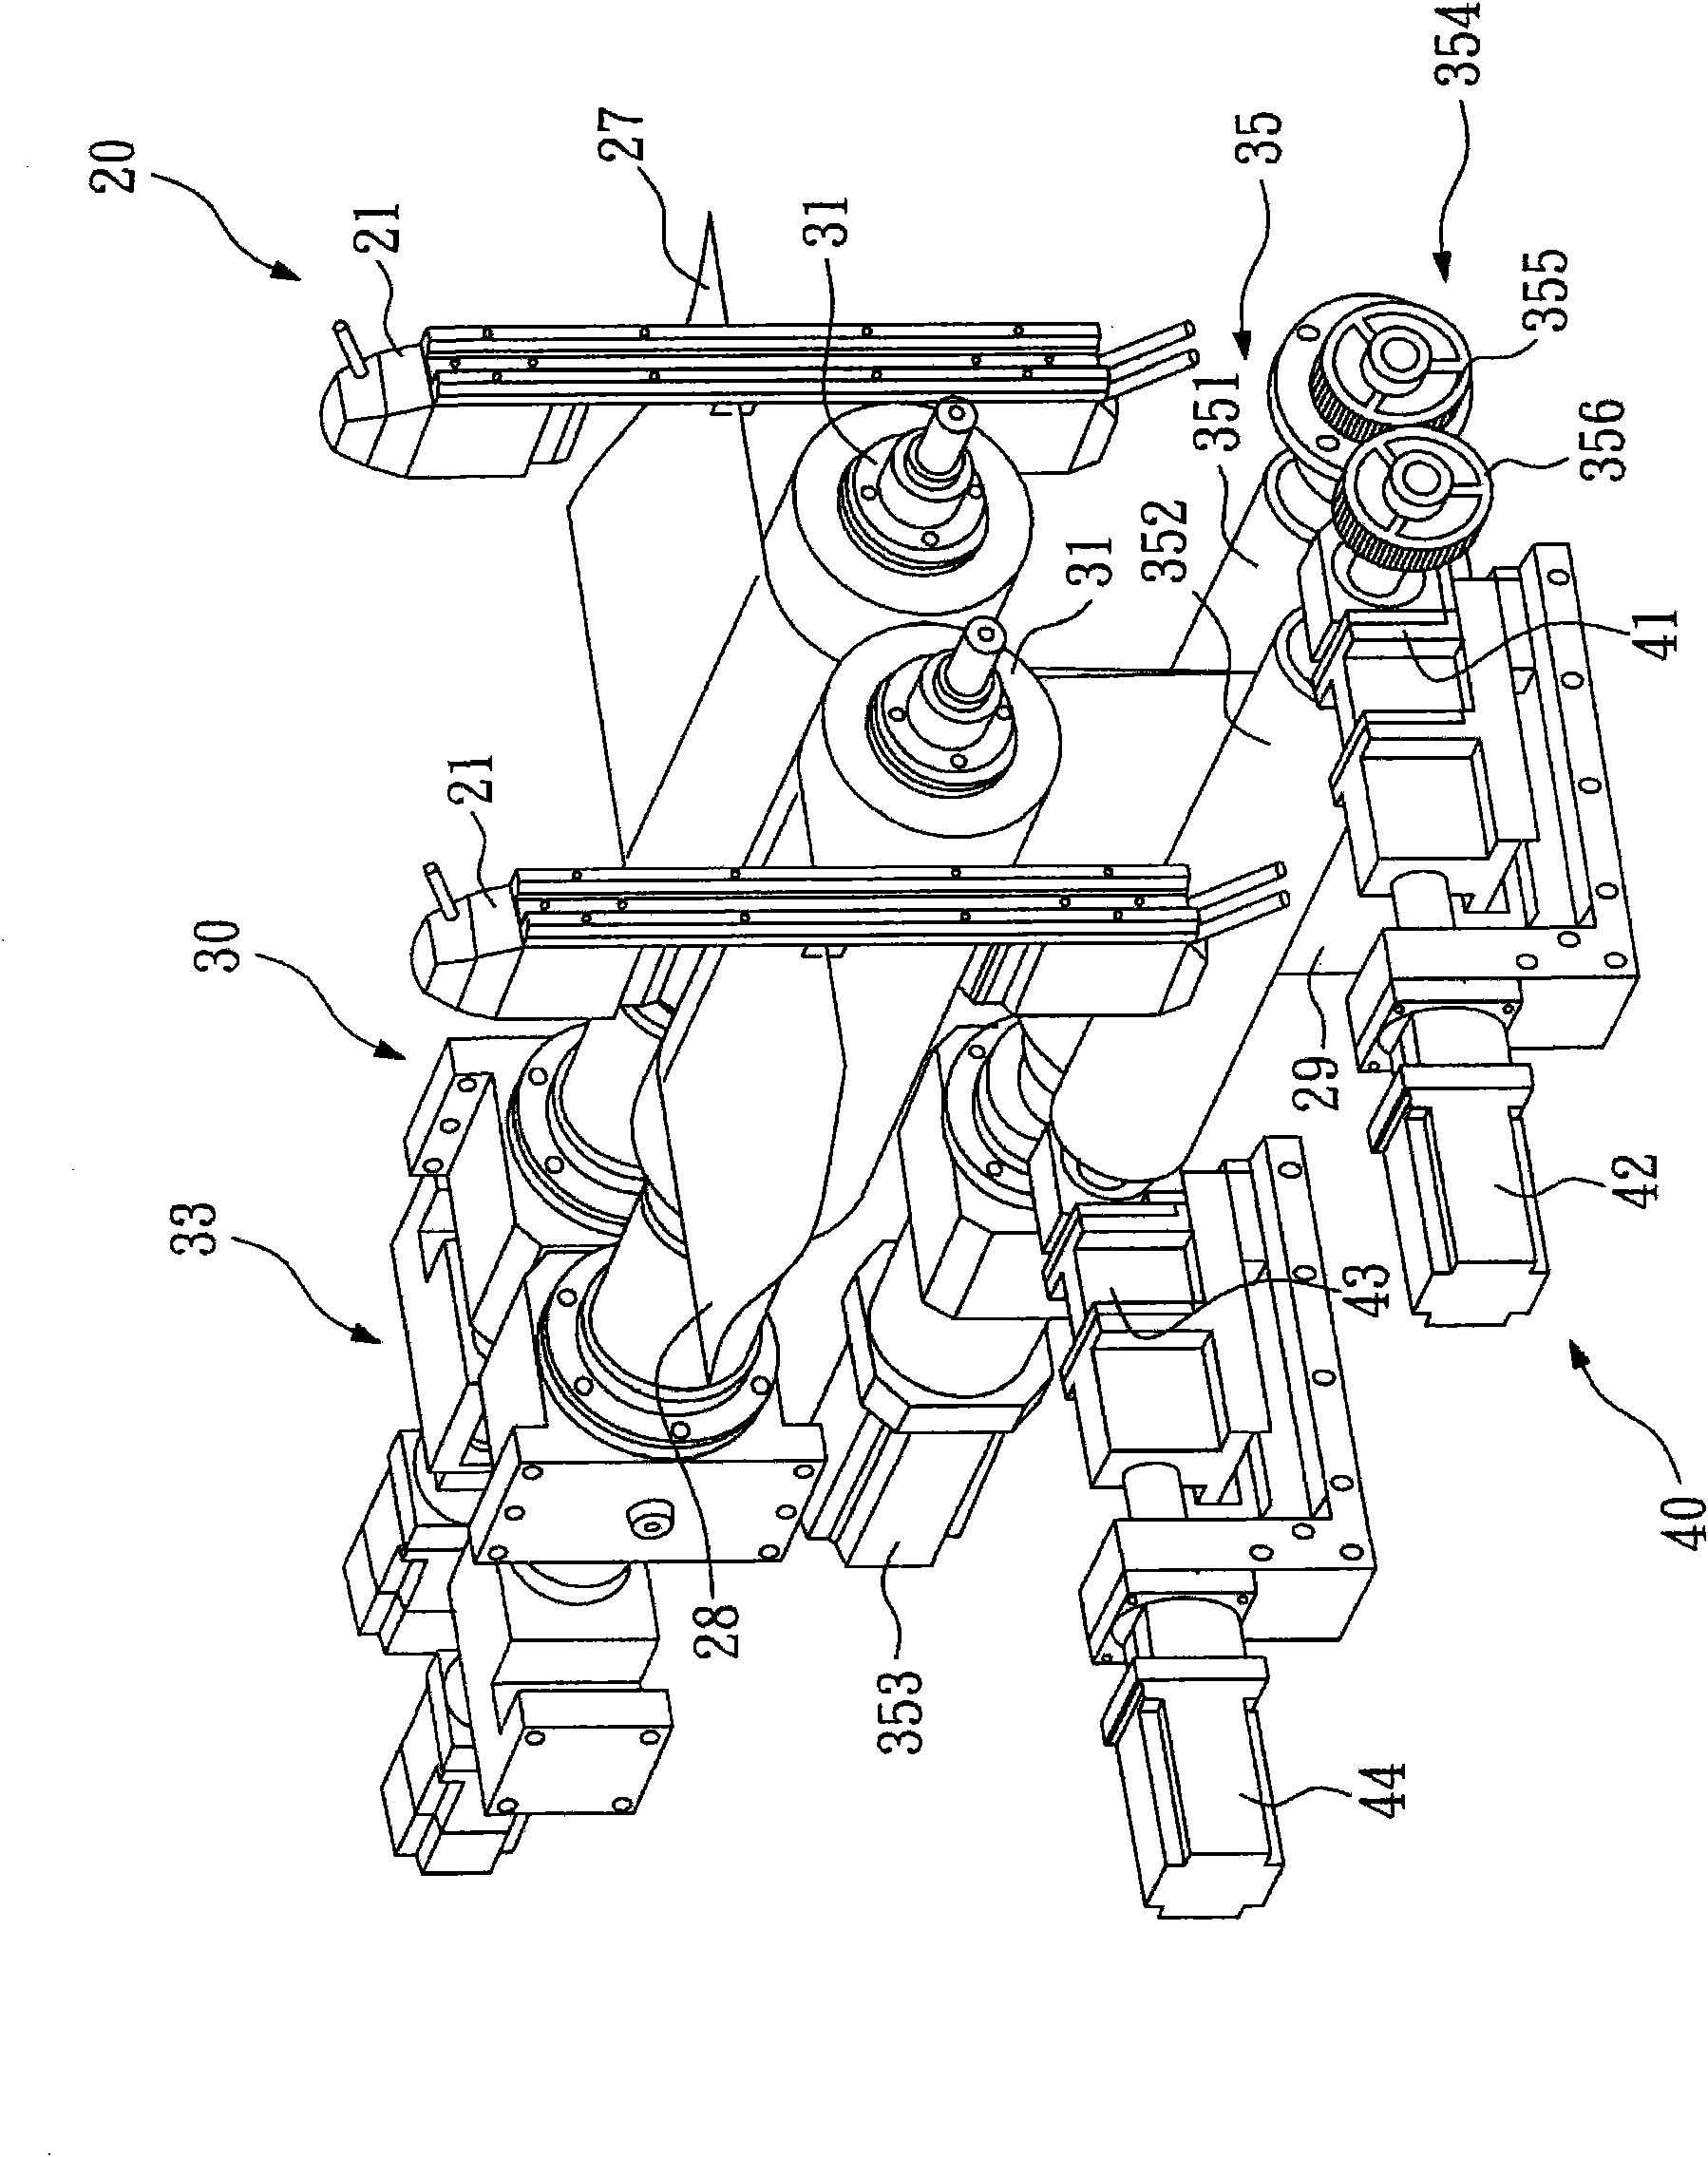 Continuous rolling clamping device for flexible substrate